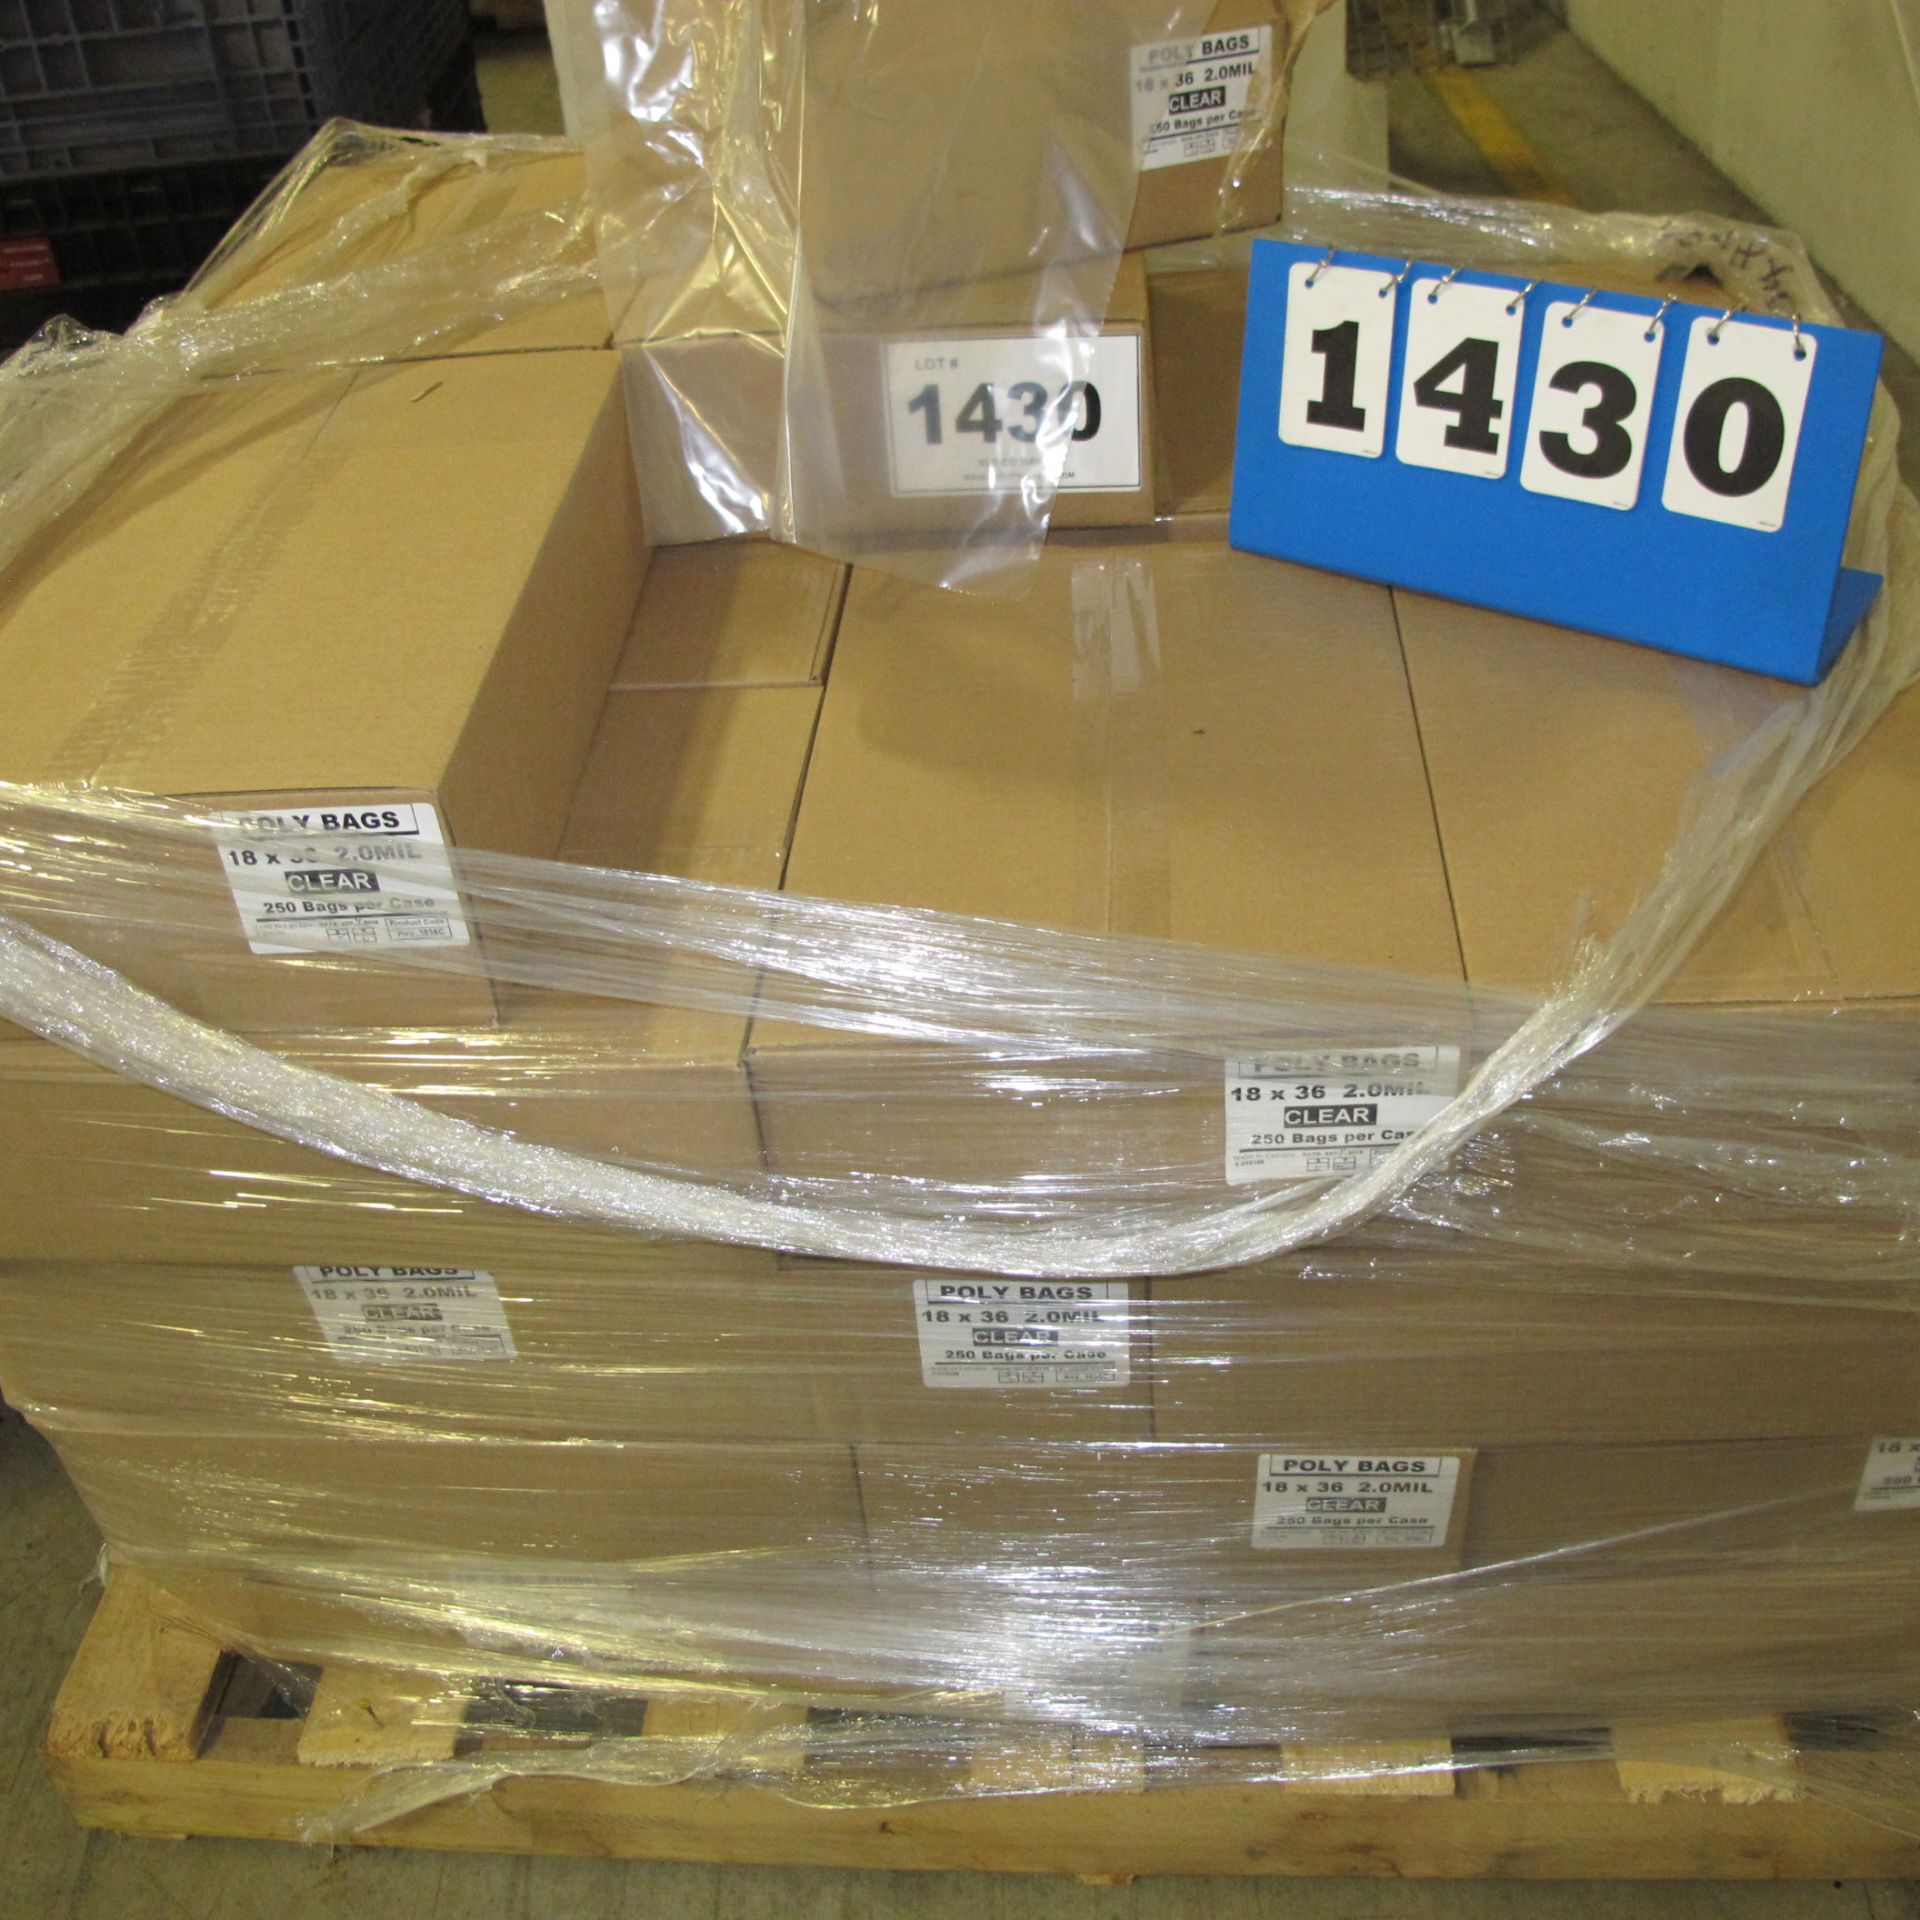 1 PALLET OF POLYBAGS 18"X36"